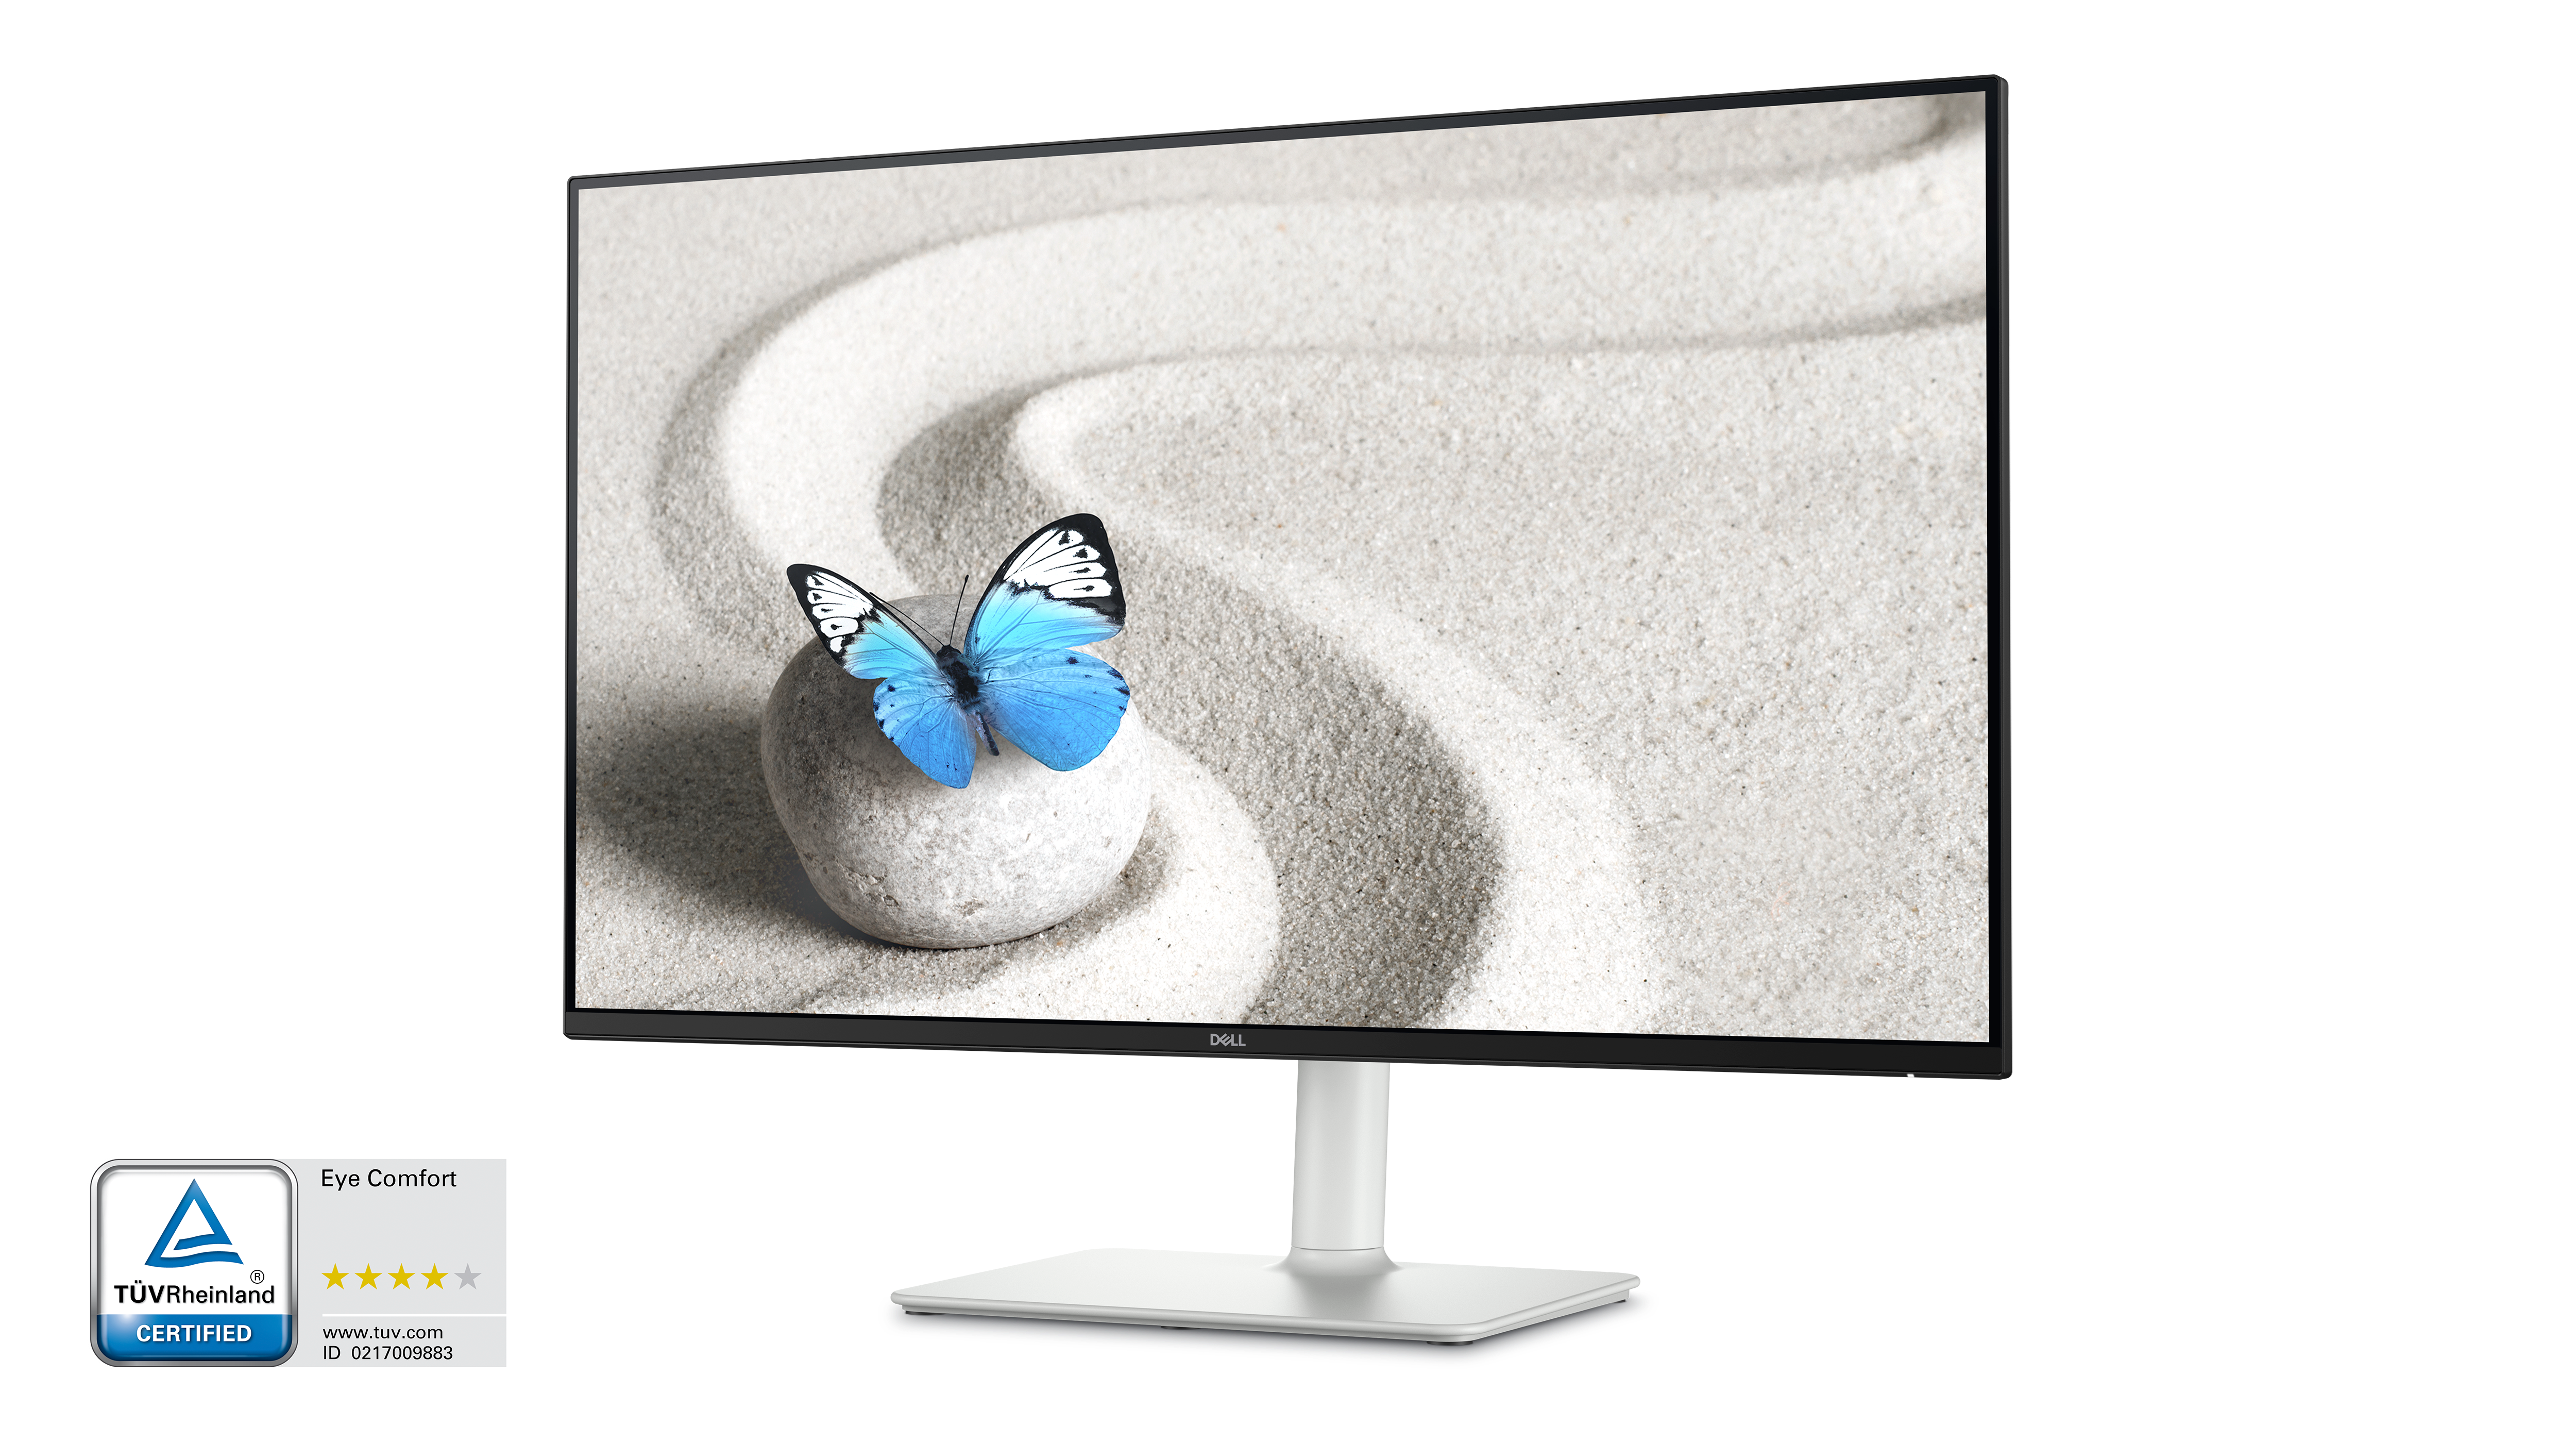 S2725DS Monitor with a screenfill showing sand raking design with colorful blue butterfly